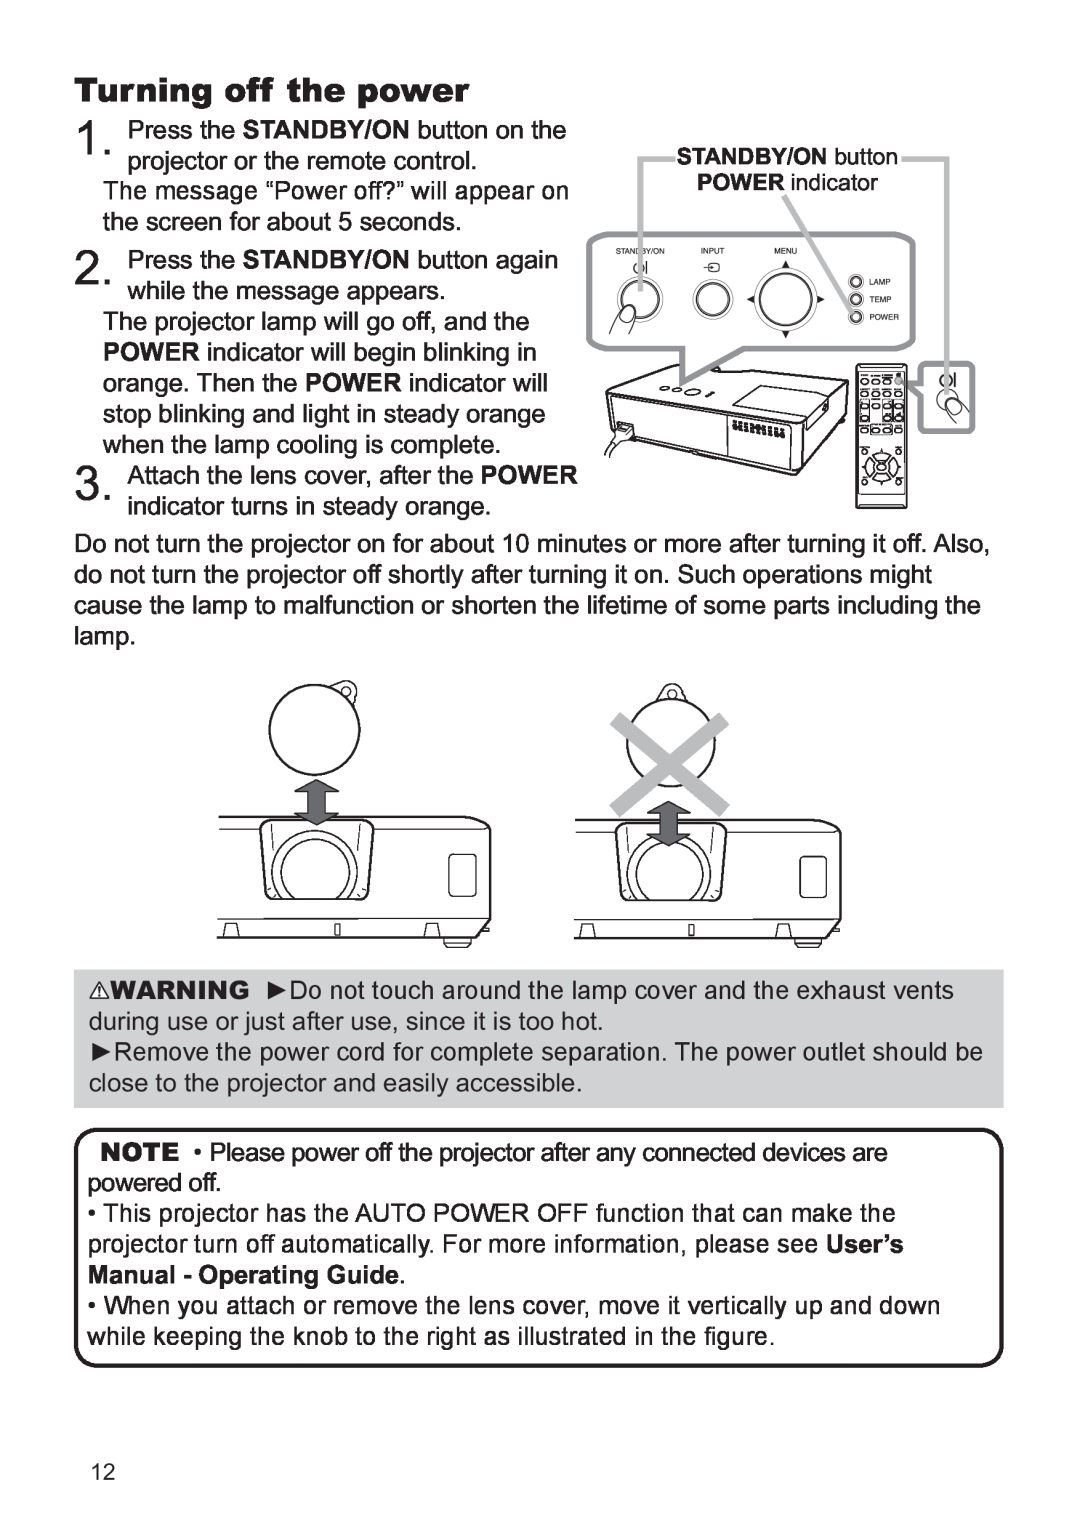 Hitachi CP-X2521WN, CP-X3021WN user manual Turning off the power, Manual - Operating Guide 